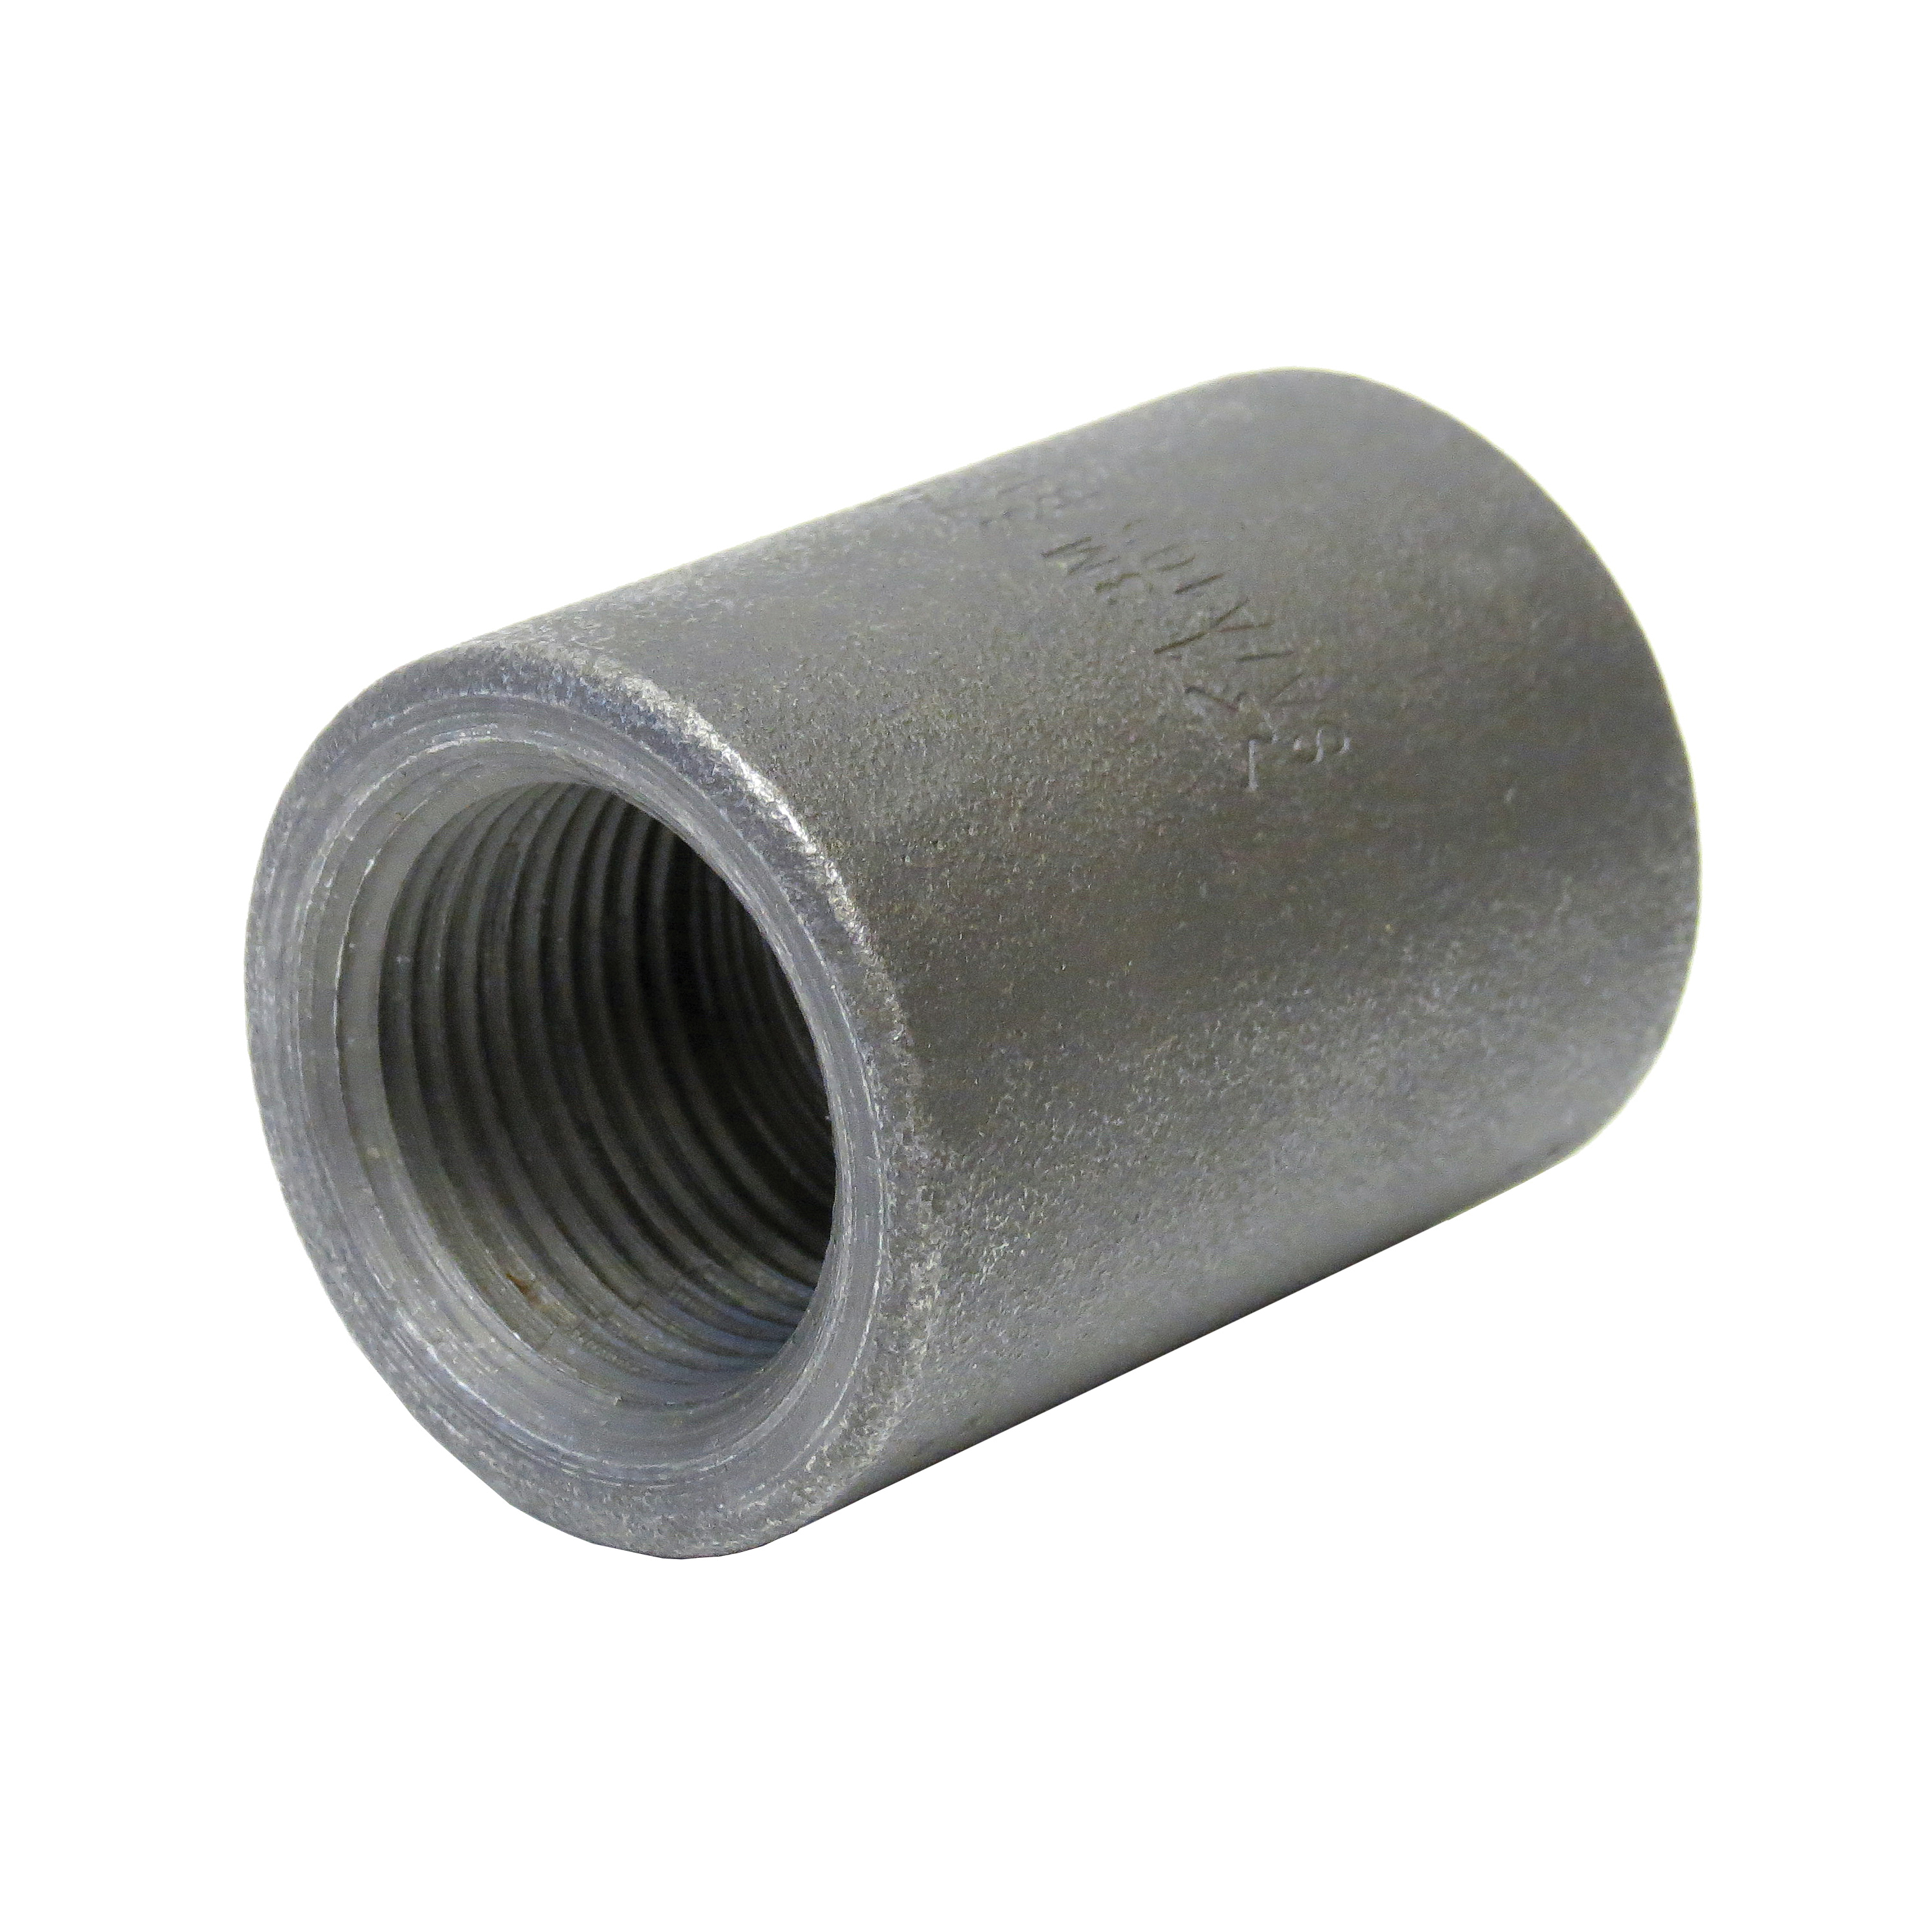 Anvil® 0361155401 FIG 2117 Pipe Coupling, 3/8 in Nominal, FNPT End Style, 3000 lb, Steel, Black Oxide, Domestic